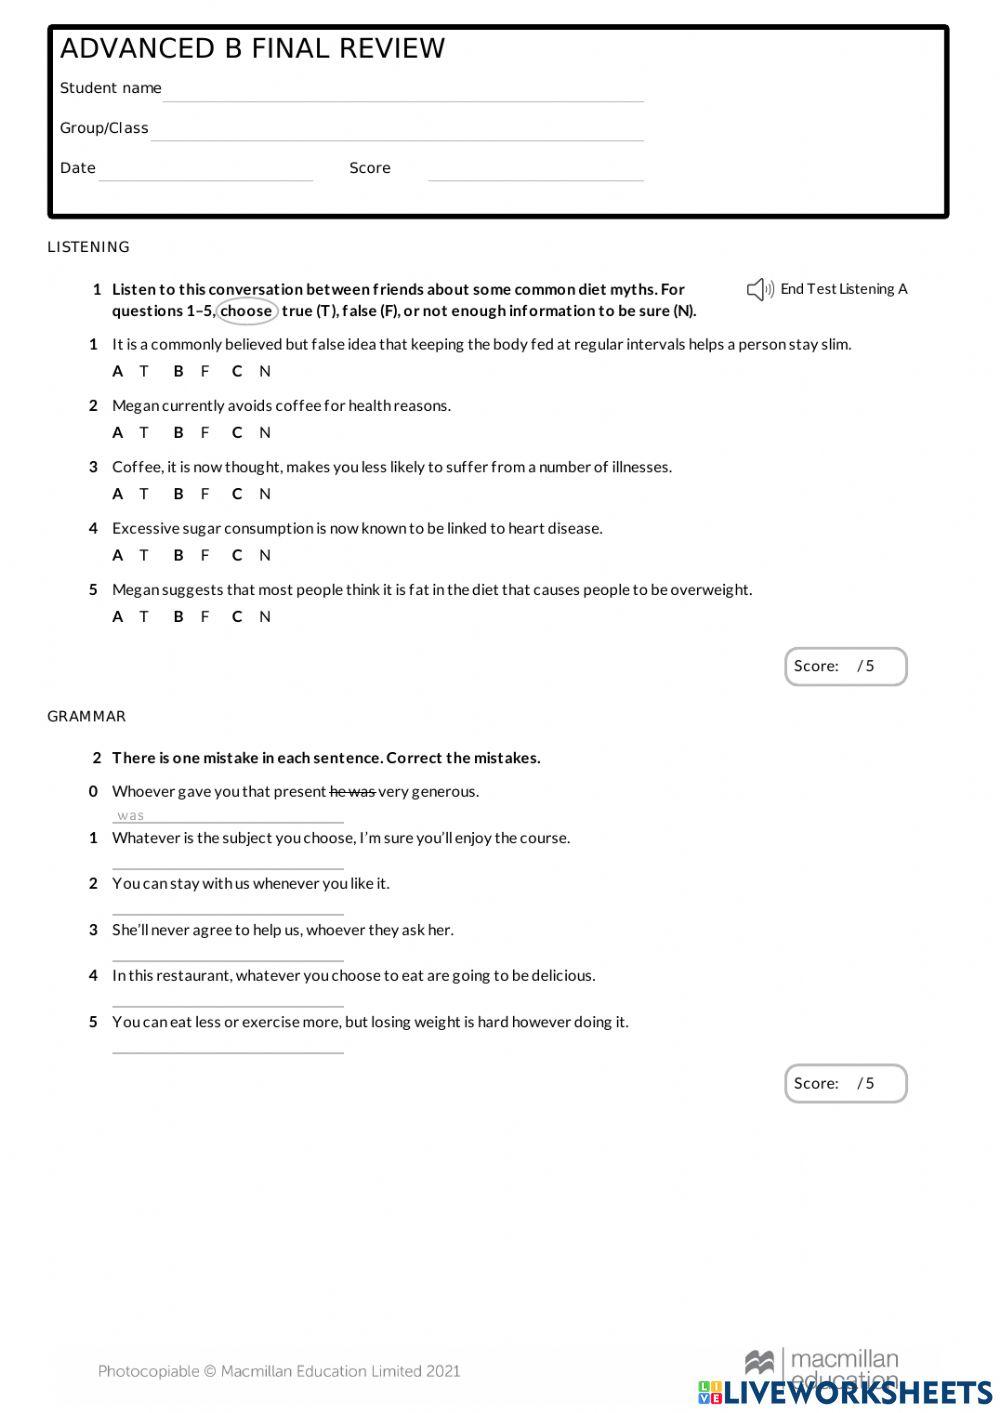 ADVANCED B FINAL REVIEW online exercise for | Live Worksheets